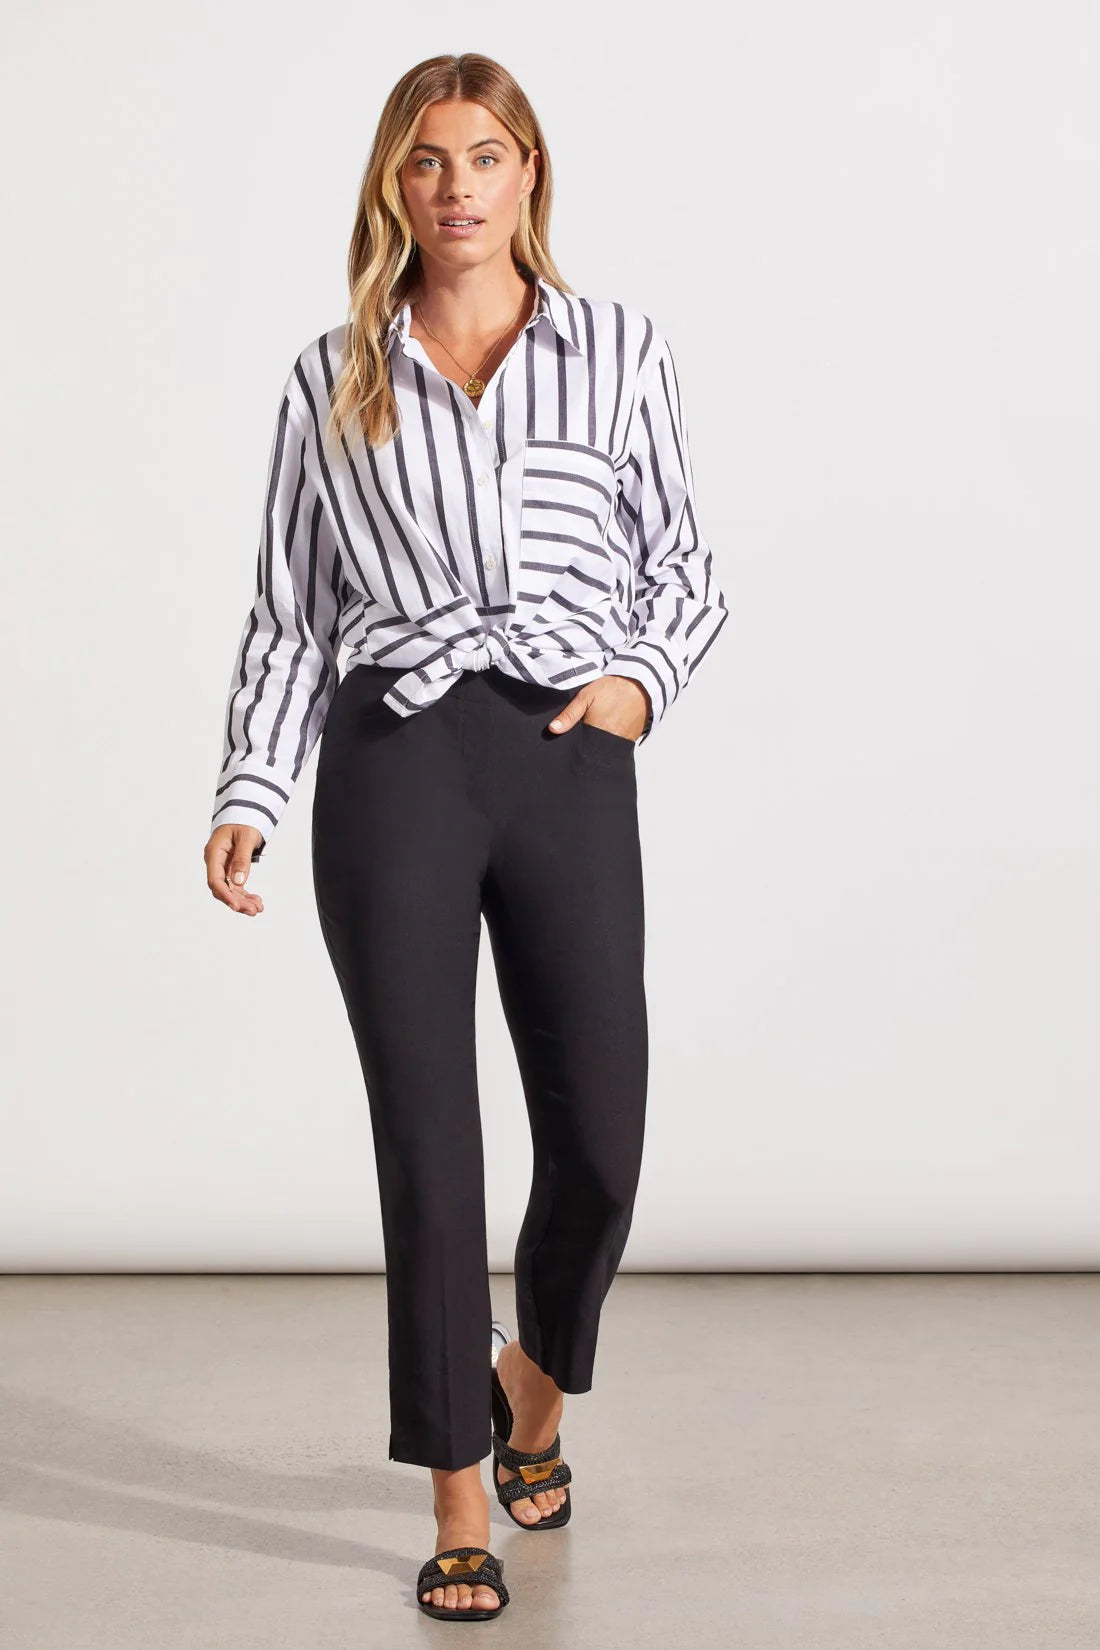 Get ready to move with ease and elegance courtesy of these pull-on ankle pants.